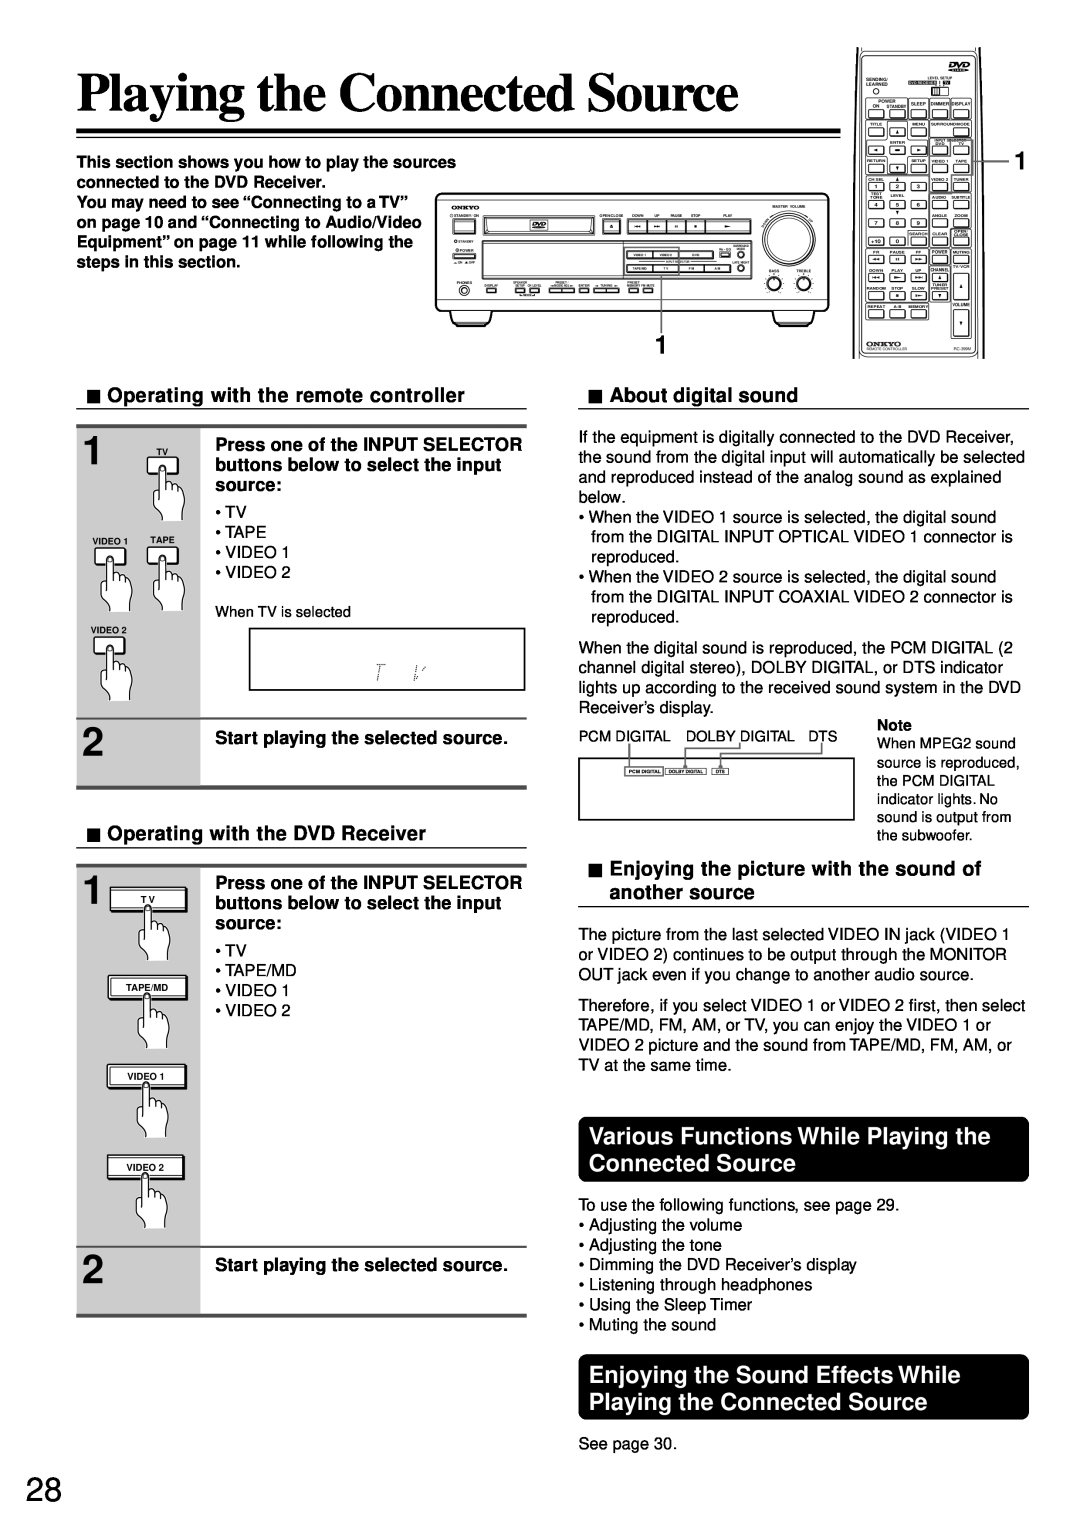 Onkyo DR-90 instruction manual Playing the Connected Source, 1 TV 